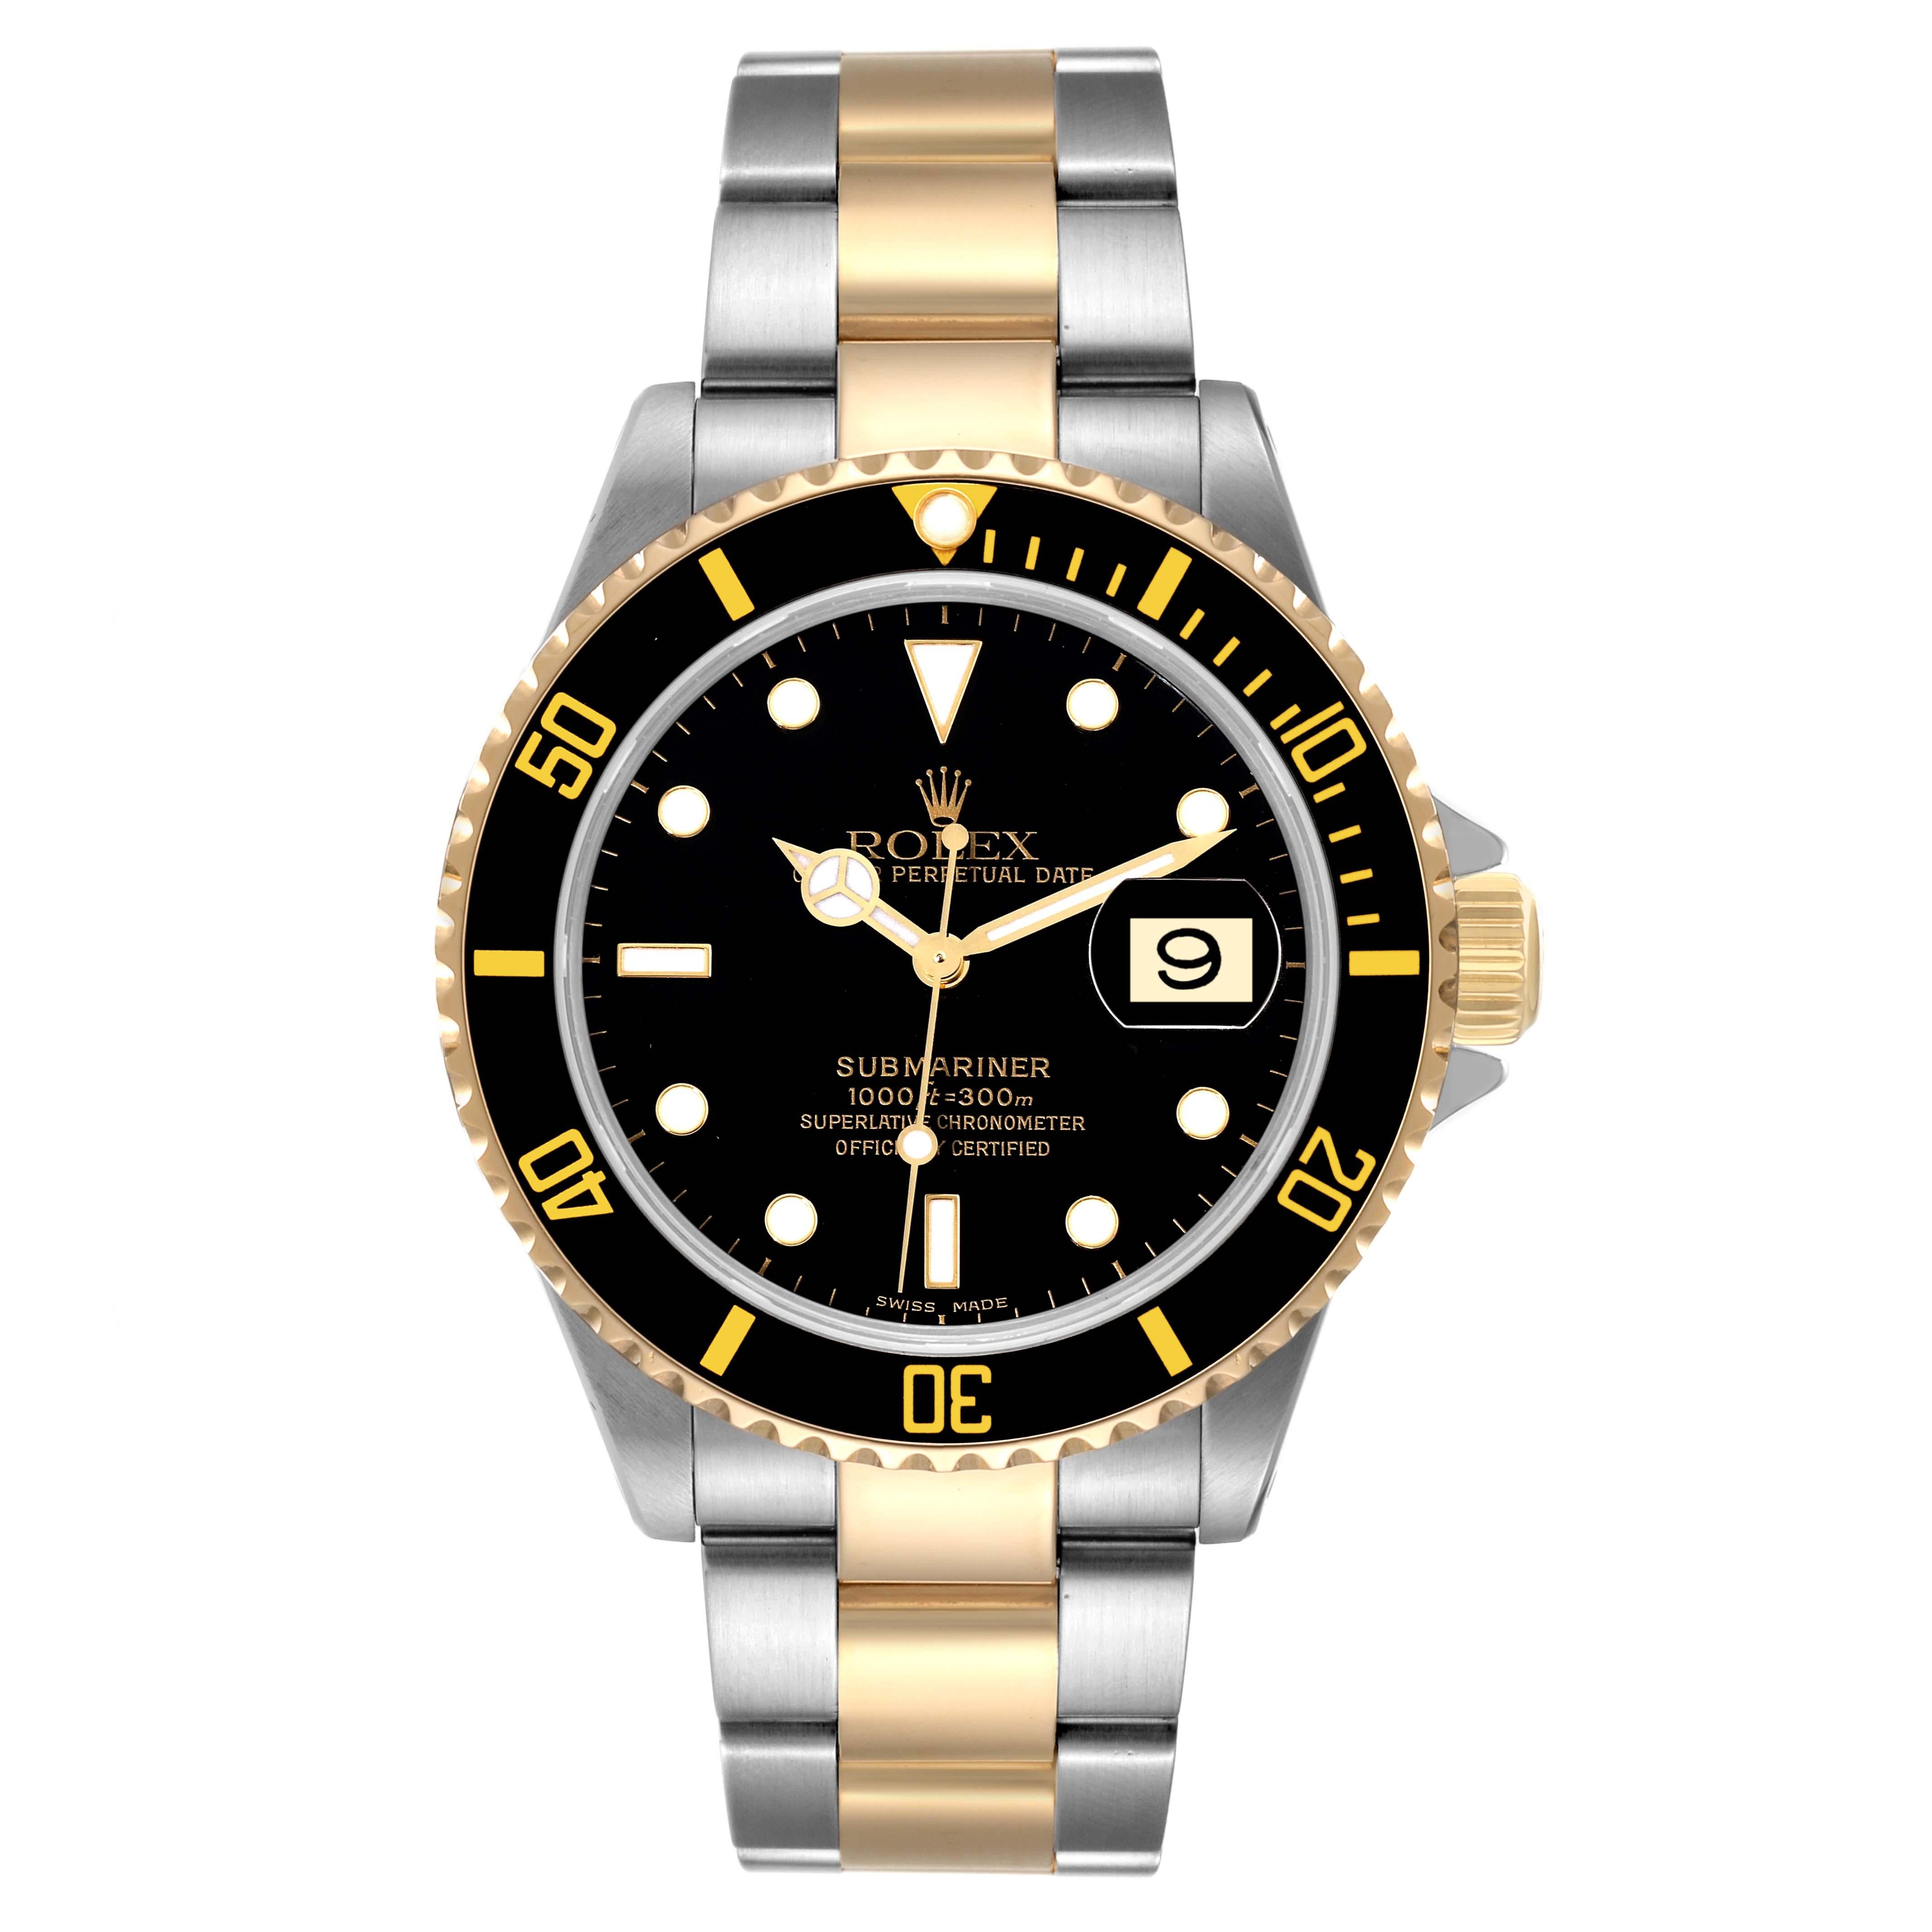 Rolex Submariner Steel Yellow Gold Black Dial Mens Watch 16613 Box Papers. Officially certified chronometer automatic self-winding movement. Stainless steel and 18k yellow gold case 40 mm in diameter. Rolex logo on the crown. Special time-lapse